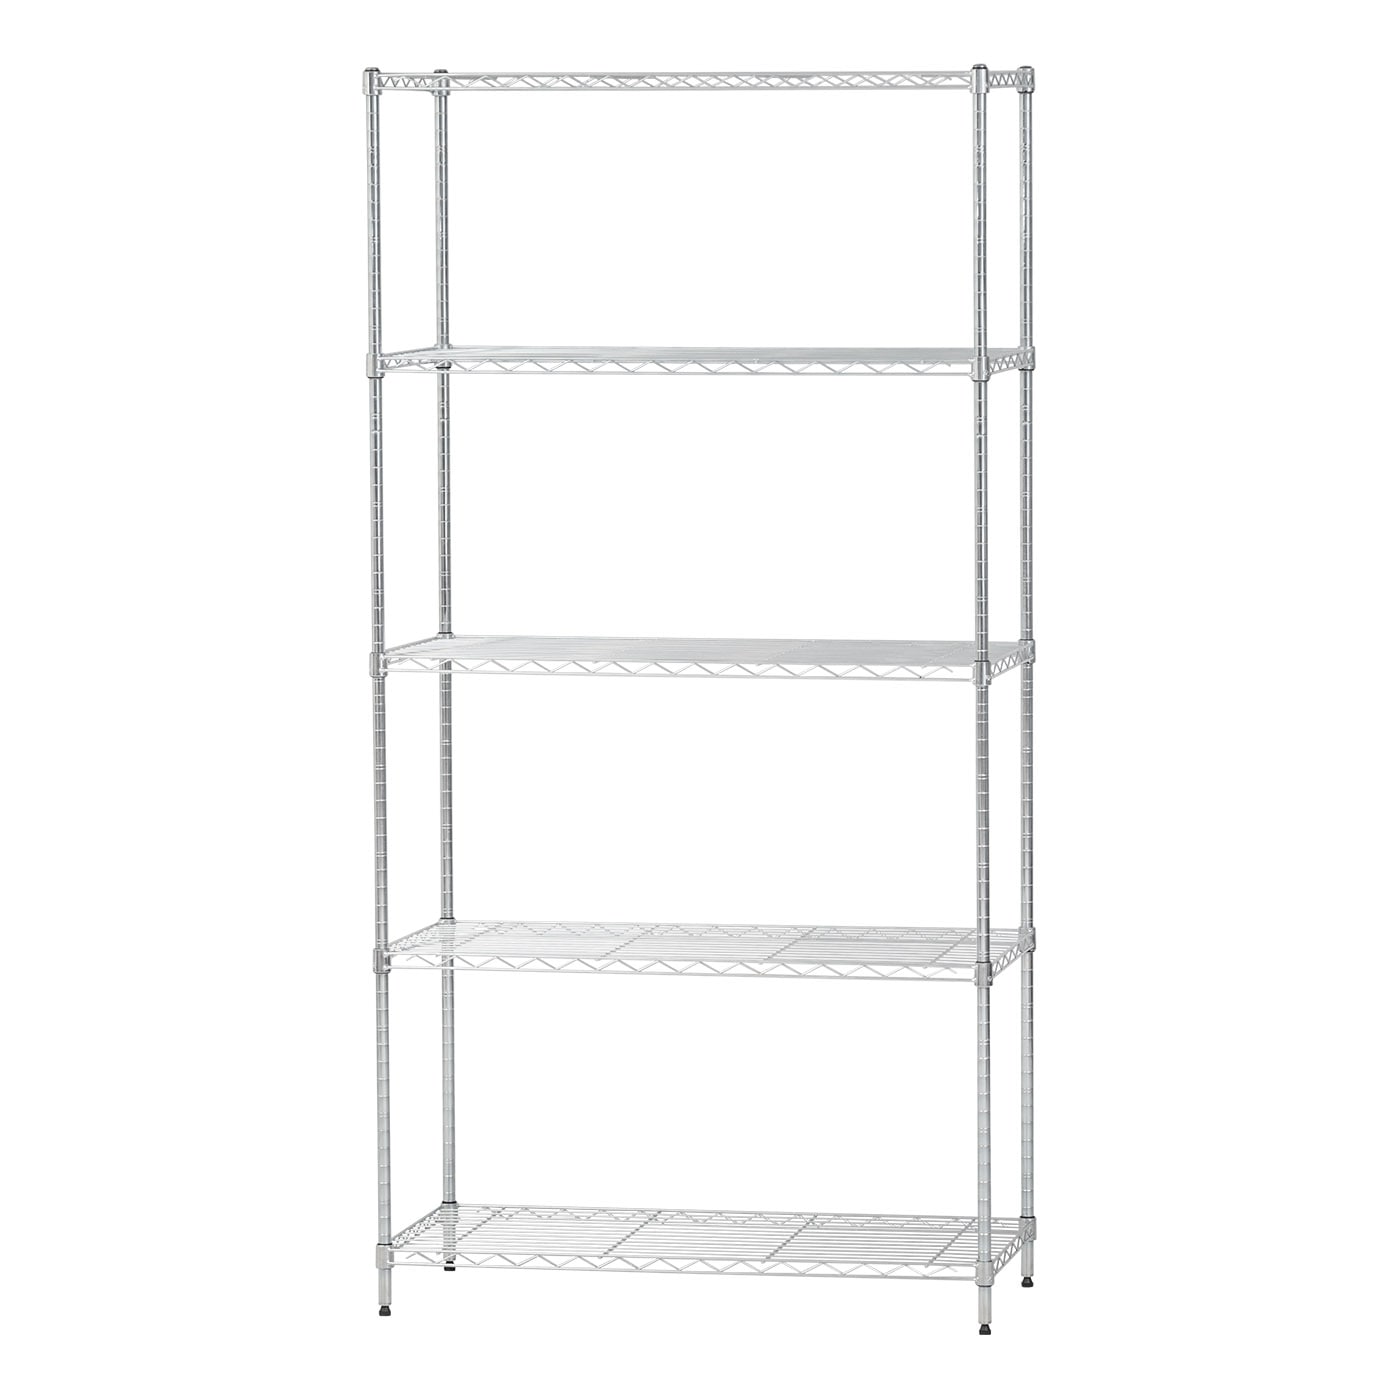 5 Tier Wire Utility Shelving Unit, 5 Tier Wire Shelving Rack